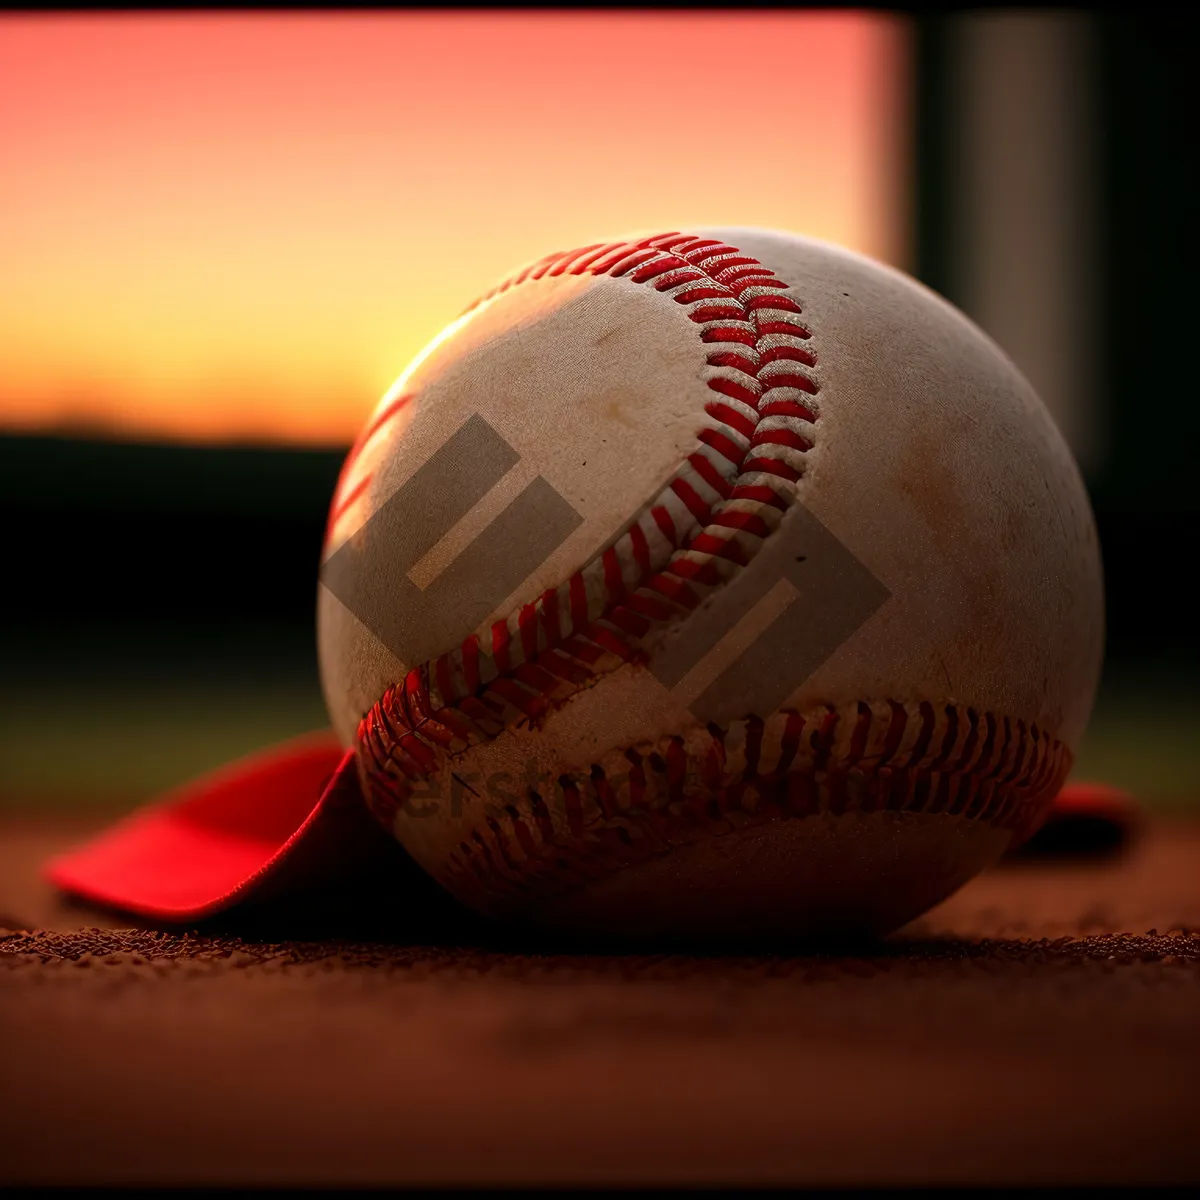 Picture of Baseball glove on grass field during game